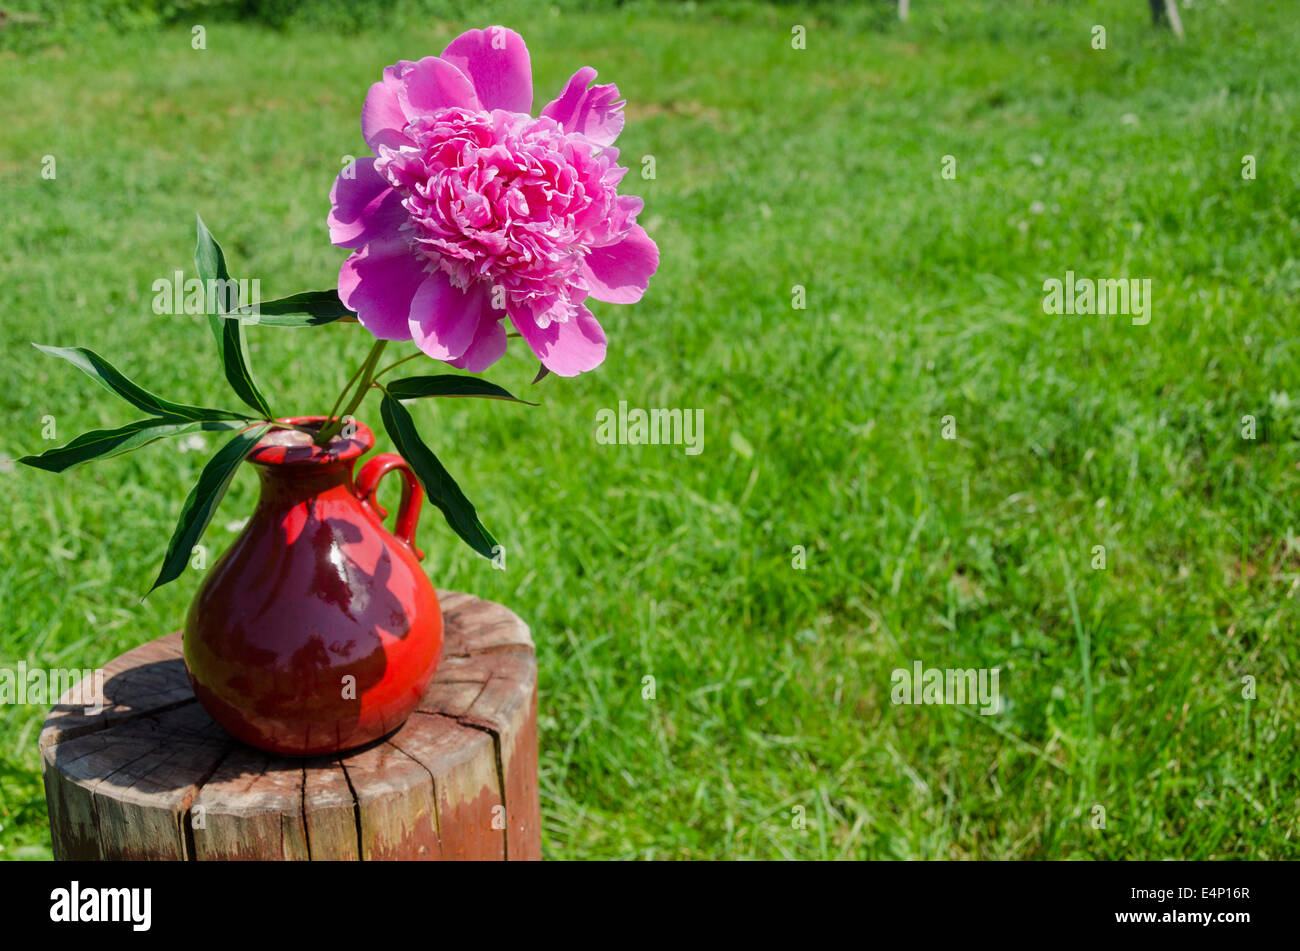 big red peony in earthen handmade pitcher on the stump grass background Stock Photo